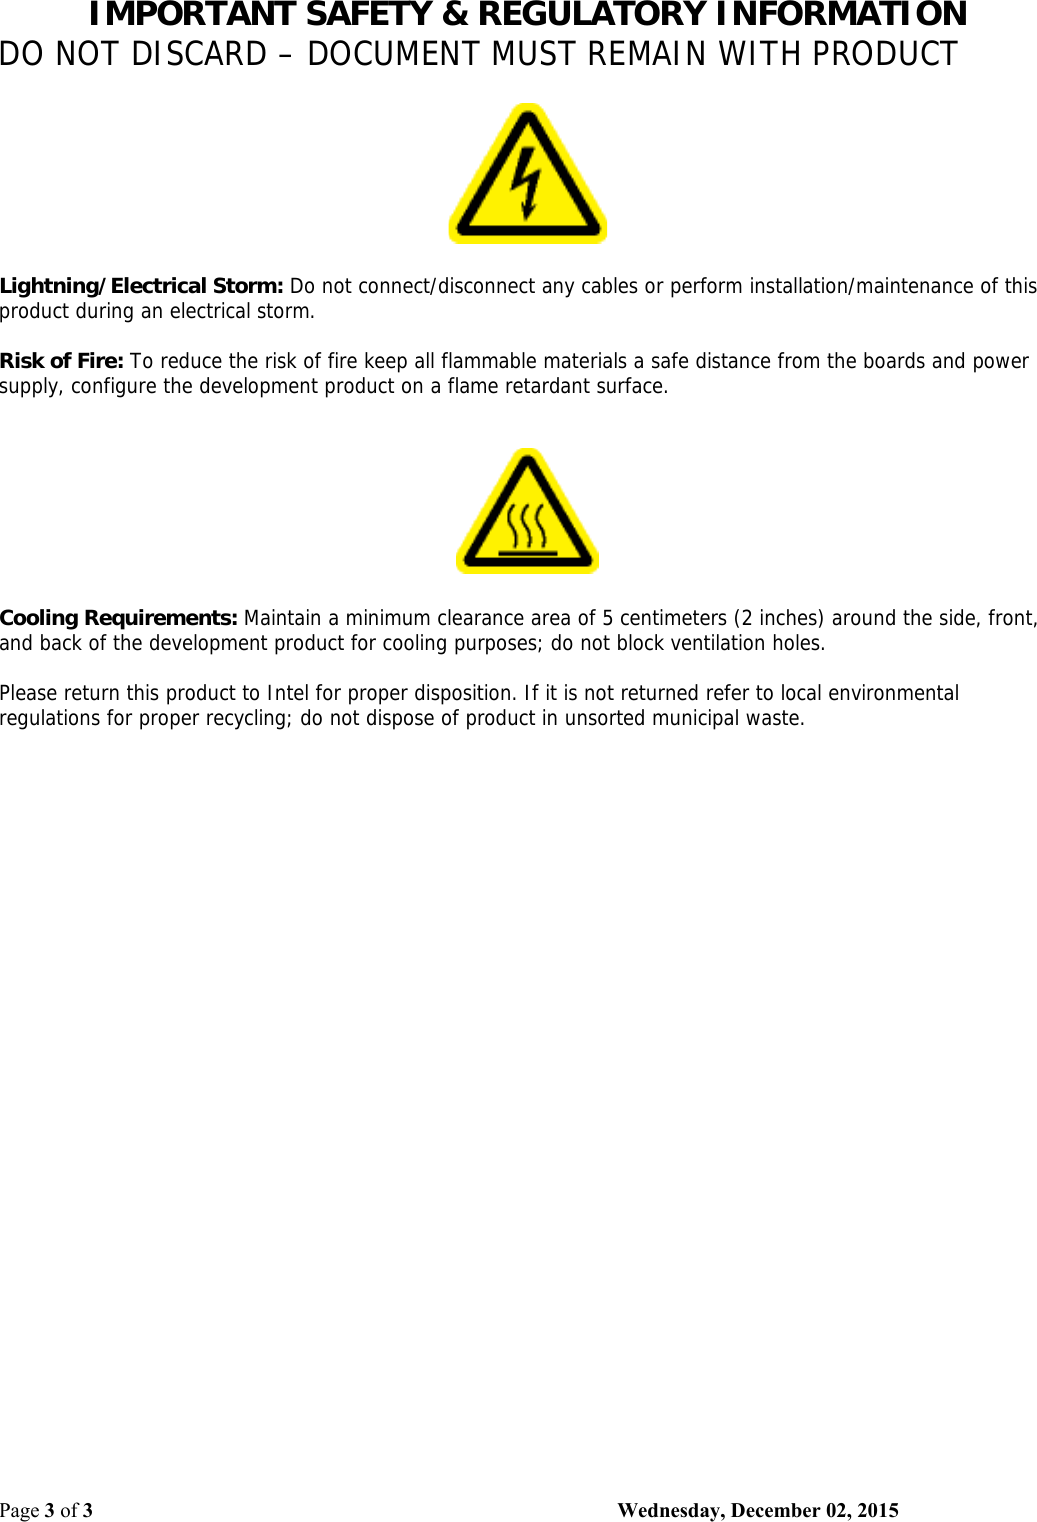 IMPORTANT SAFETY &amp; REGULATORY INFORMATION DO NOT DISCARD – DOCUMENT MUST REMAIN WITH PRODUCT Page 3 of 3    Wednesday, December 02, 2015     Lightning/Electrical Storm: Do not connect/disconnect any cables or perform installation/maintenance of this product during an electrical storm.  Risk of Fire: To reduce the risk of fire keep all flammable materials a safe distance from the boards and power supply, configure the development product on a flame retardant surface.       Cooling Requirements: Maintain a minimum clearance area of 5 centimeters (2 inches) around the side, front, and back of the development product for cooling purposes; do not block ventilation holes.  Please return this product to Intel for proper disposition. If it is not returned refer to local environmental regulations for proper recycling; do not dispose of product in unsorted municipal waste.  